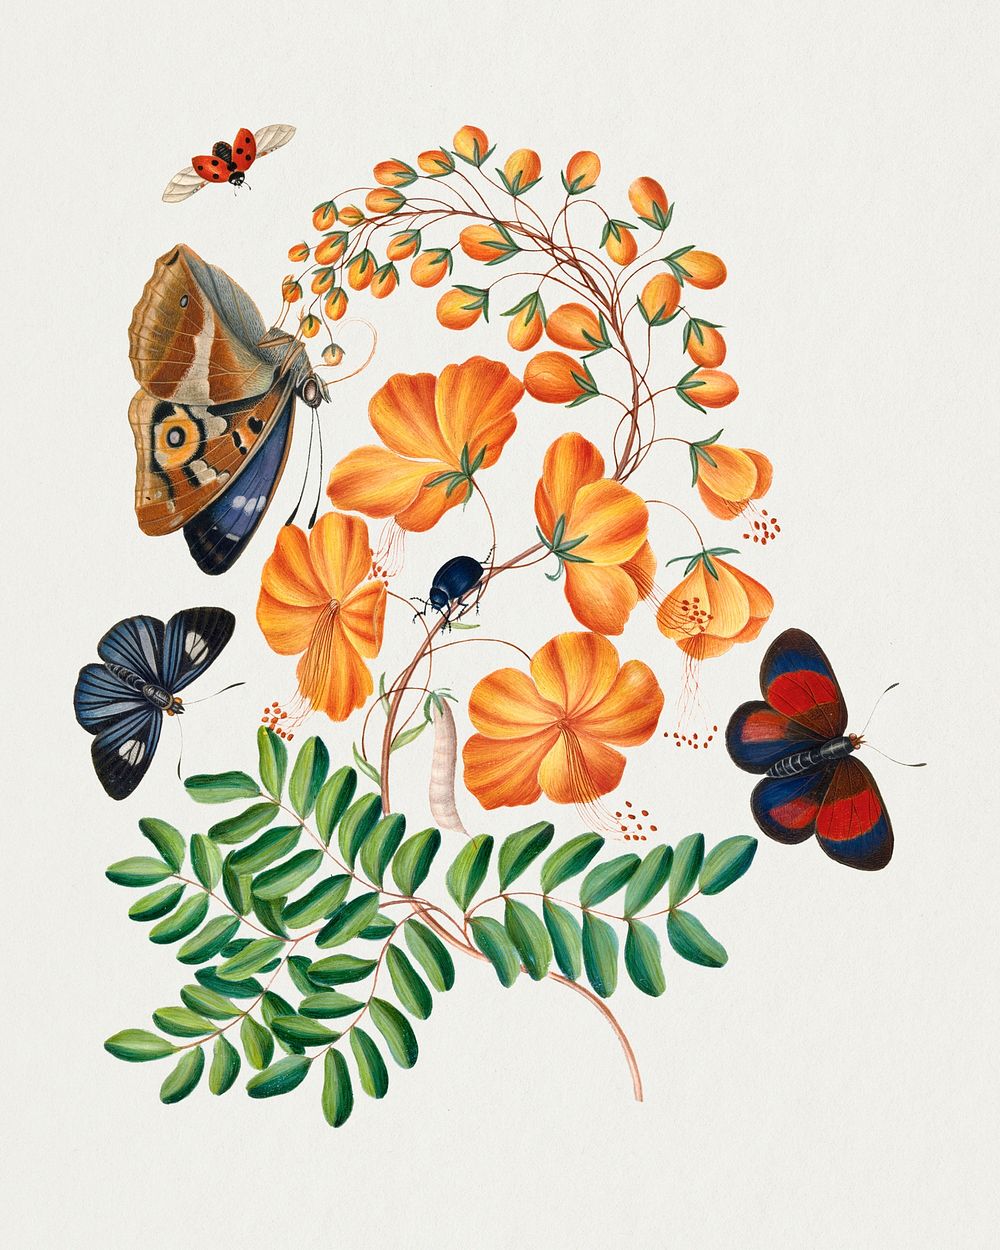 Botanical flower, butterfly sticker psd, remixed from artworks by James Bolton